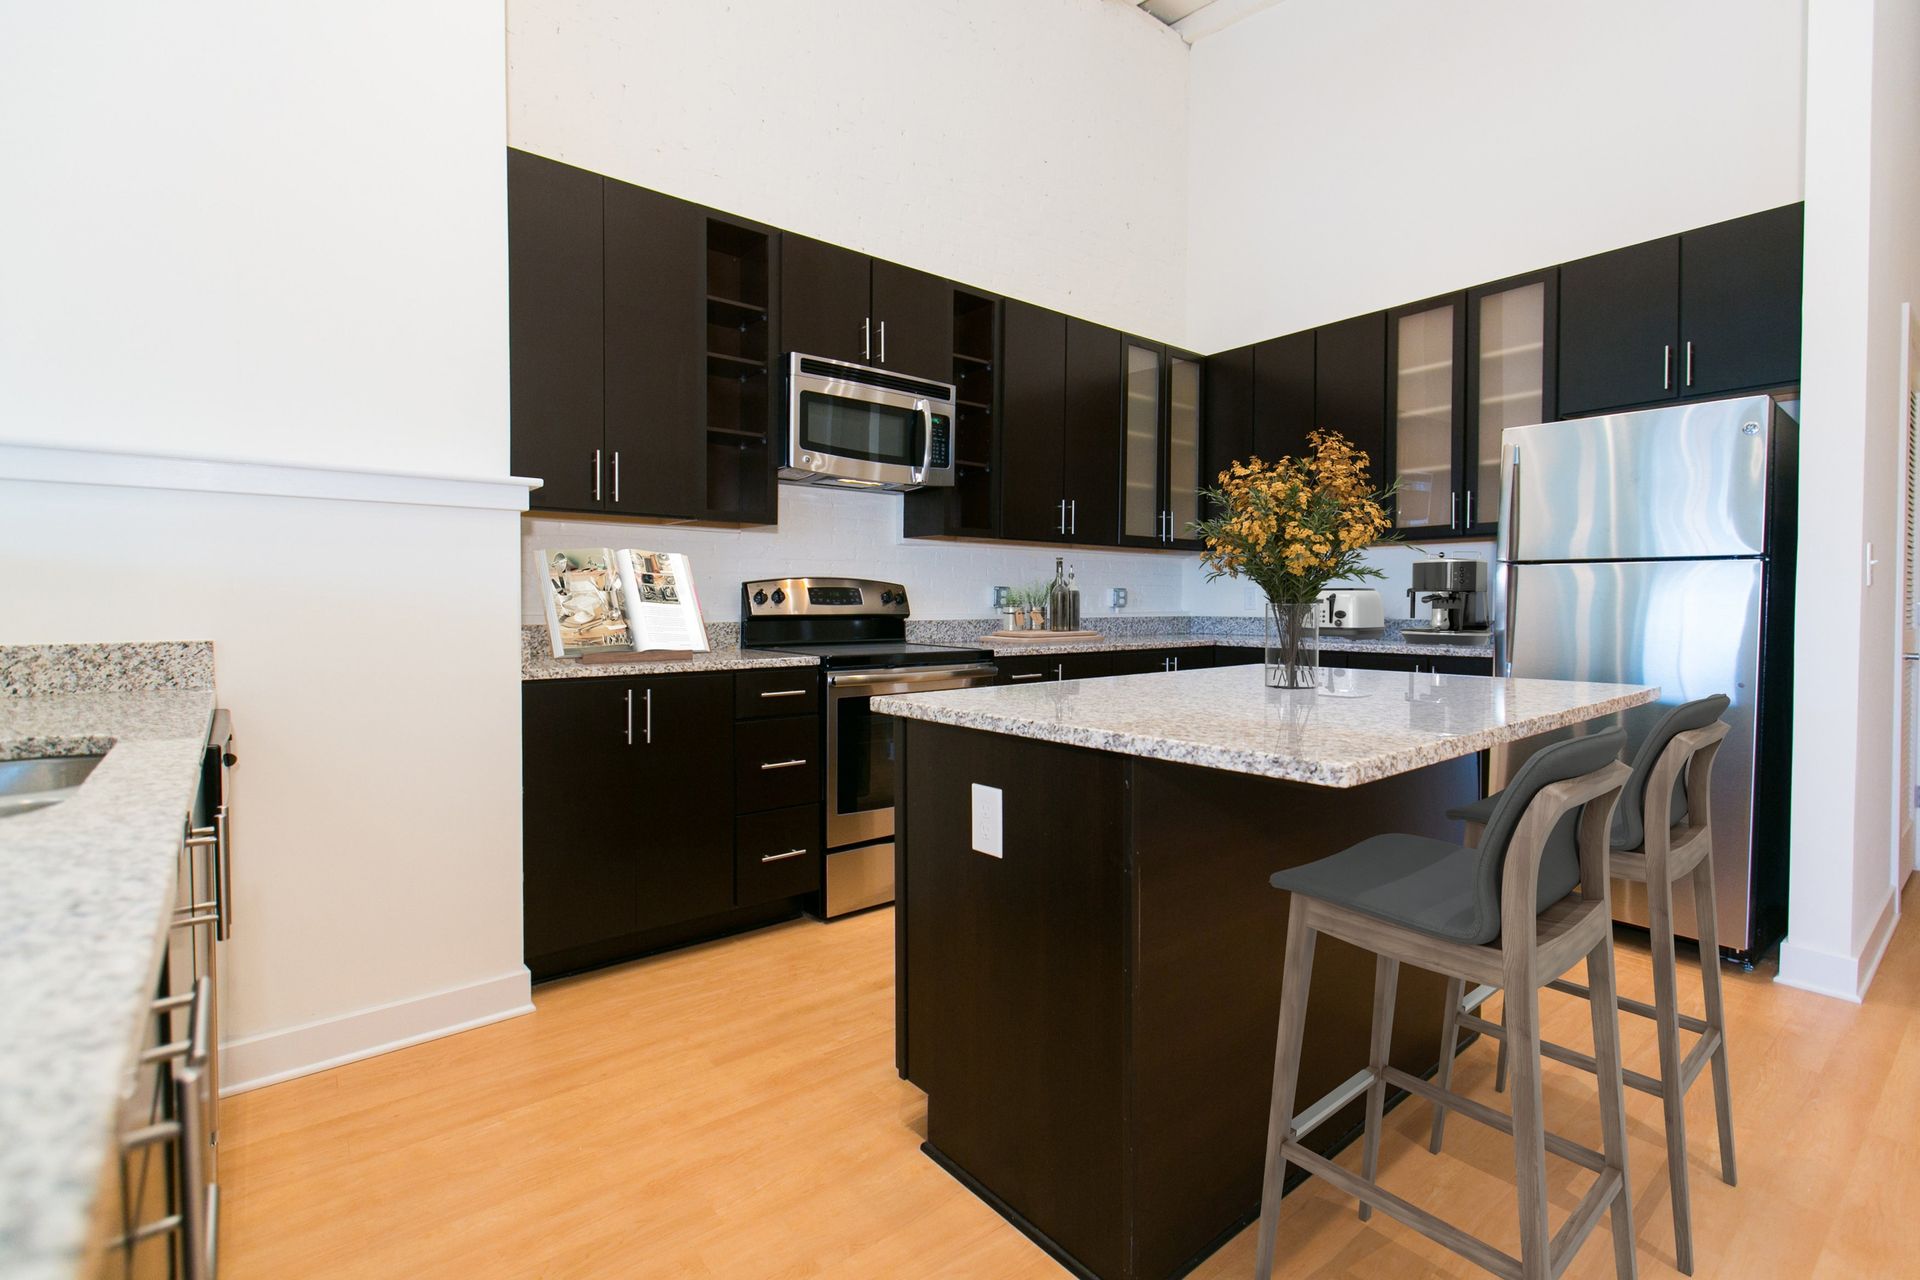 Kitchen with Island at Marketplace at Fells Point.